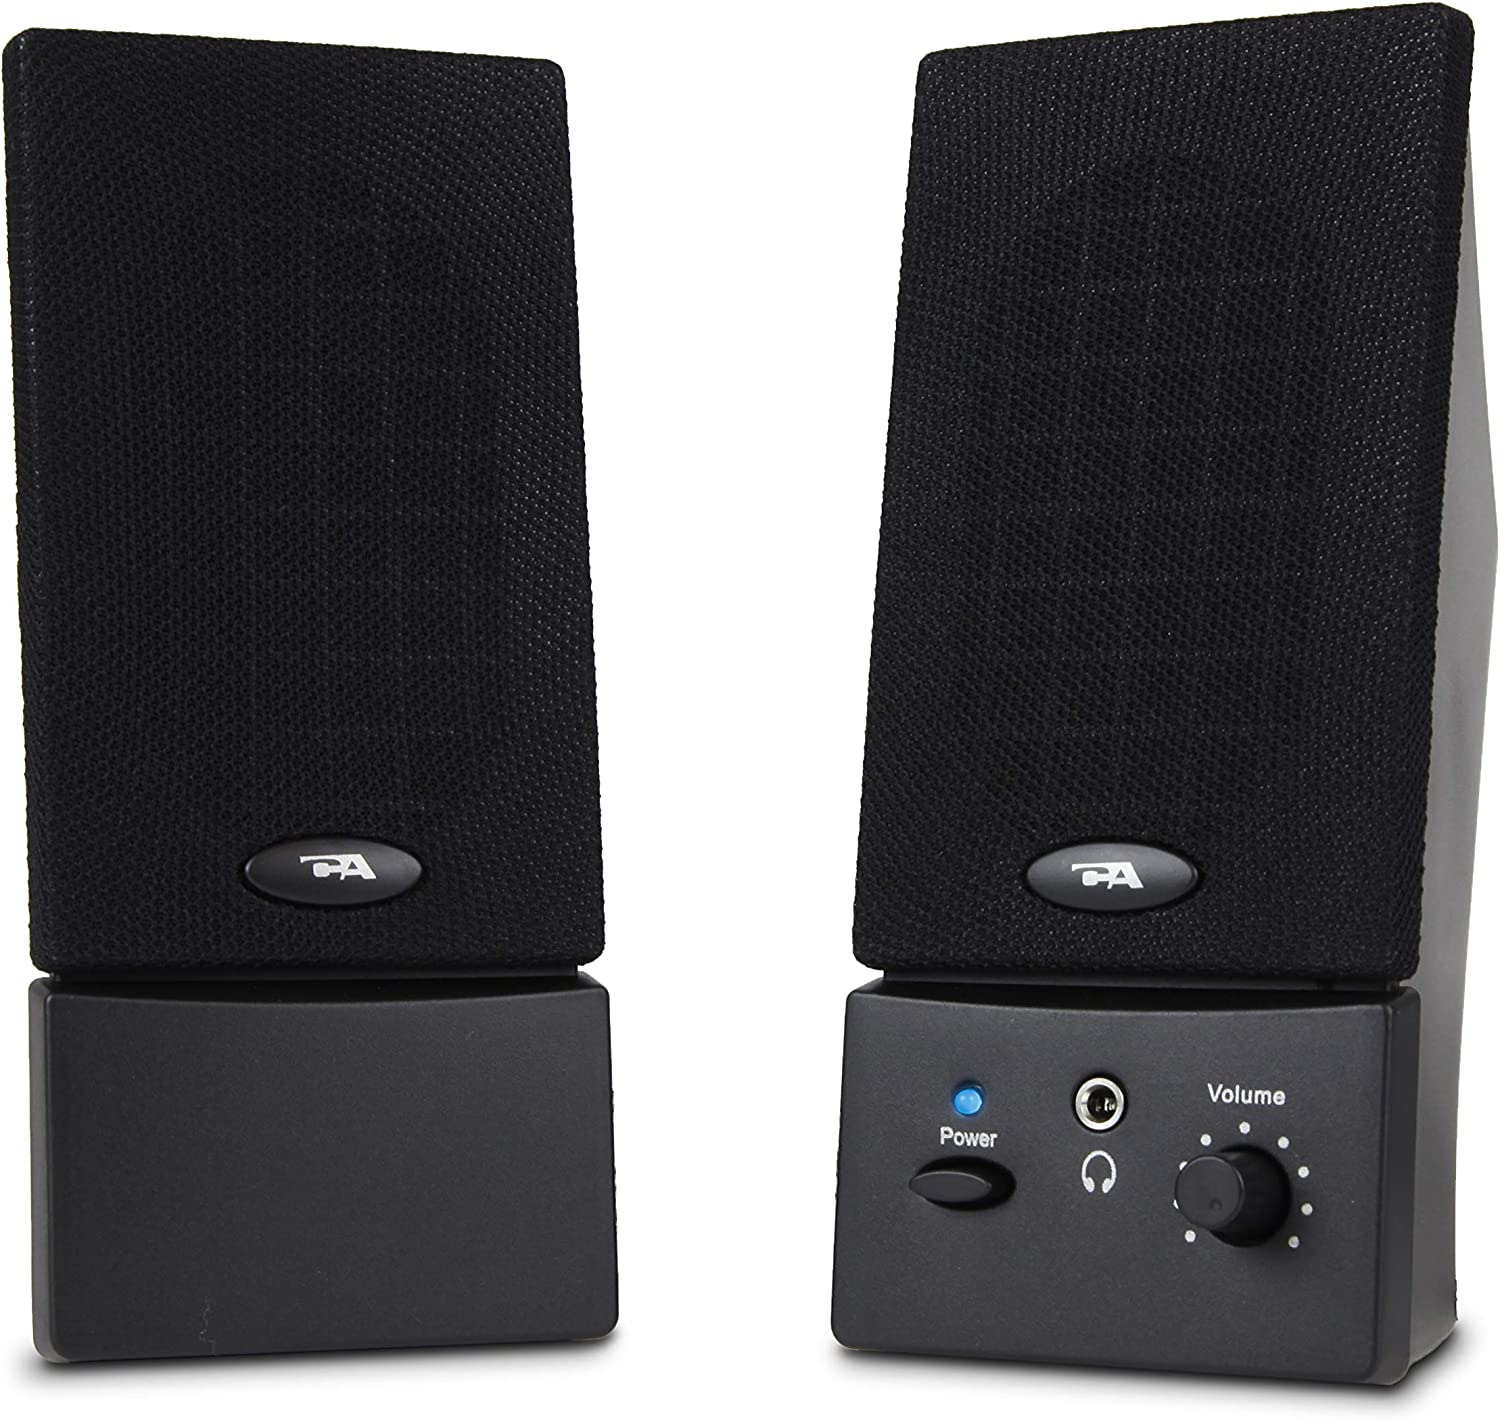 Cyber Acoustics USB Powered 2.0 Desktop Speaker System with 3.5mm Audio for and